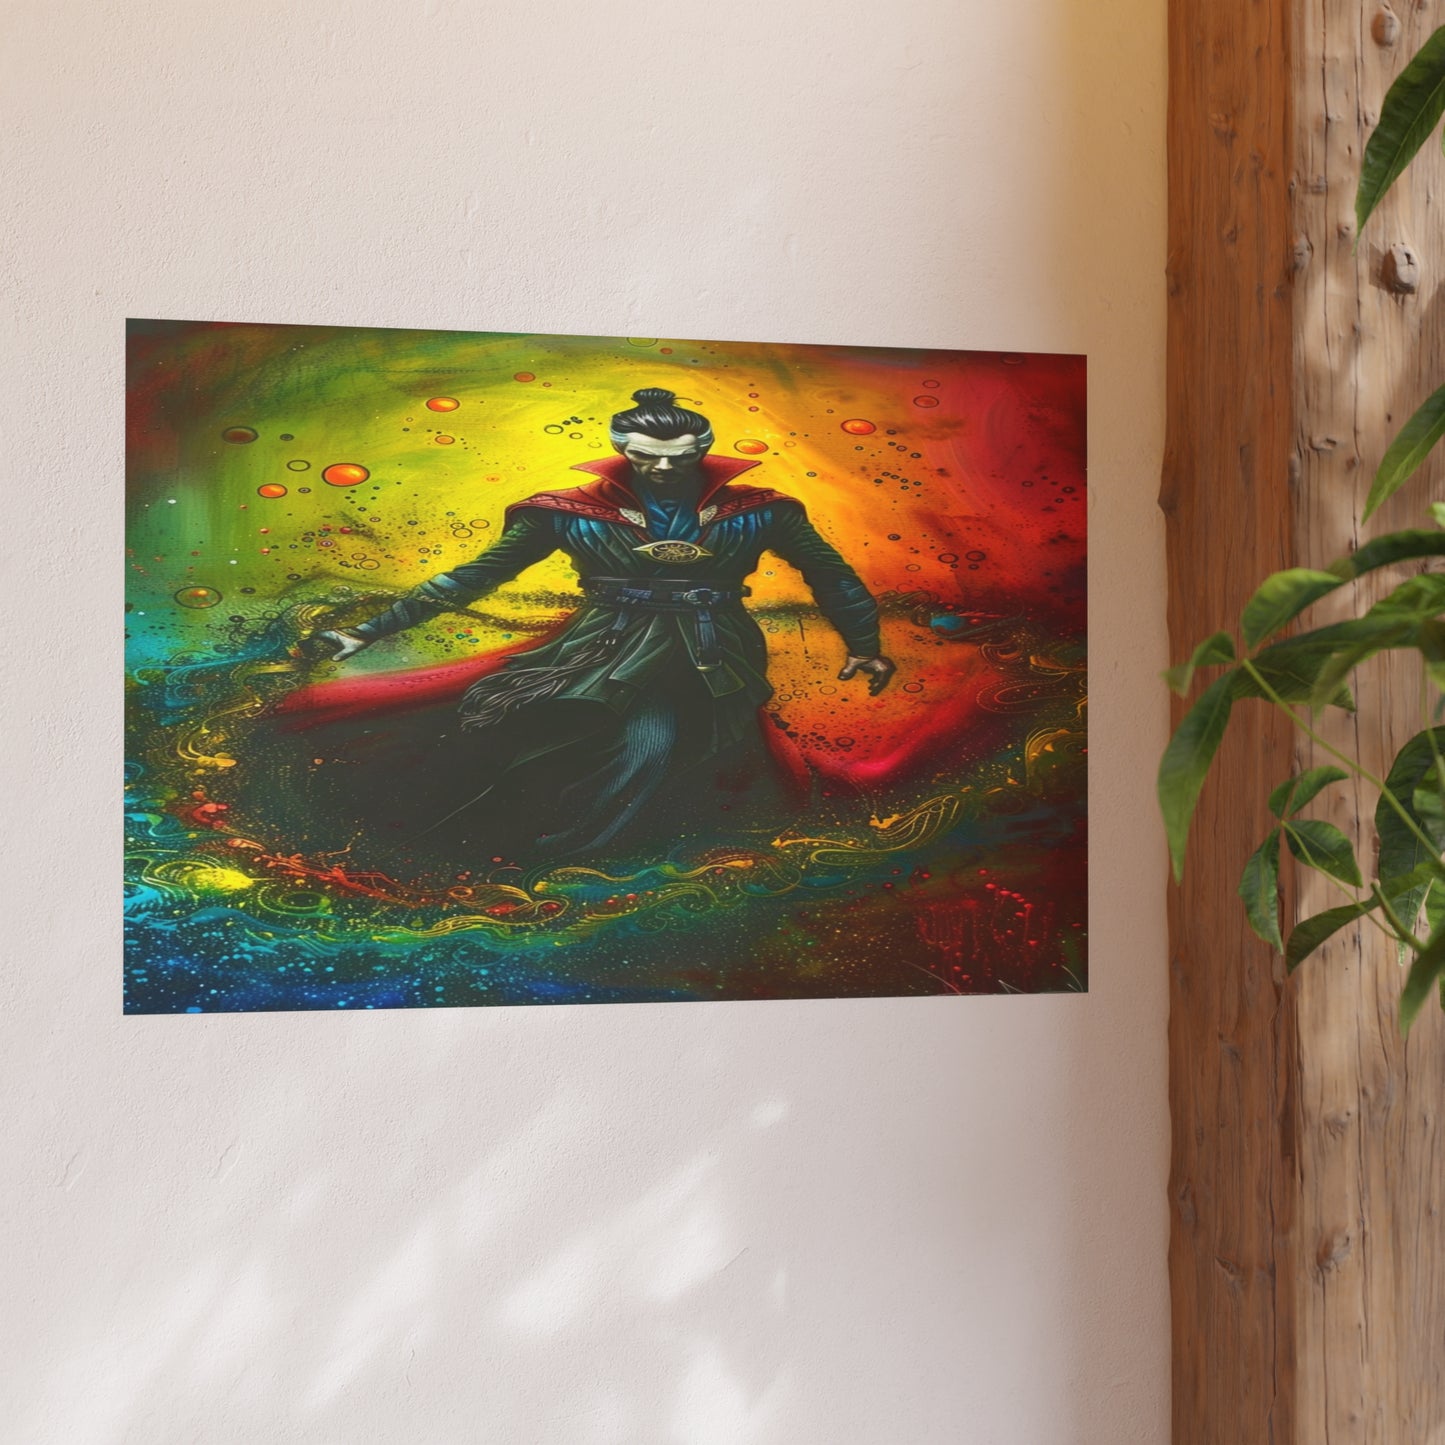 Satin and Archival Matte Posters: Doctor Strange (inspired by Marvel)